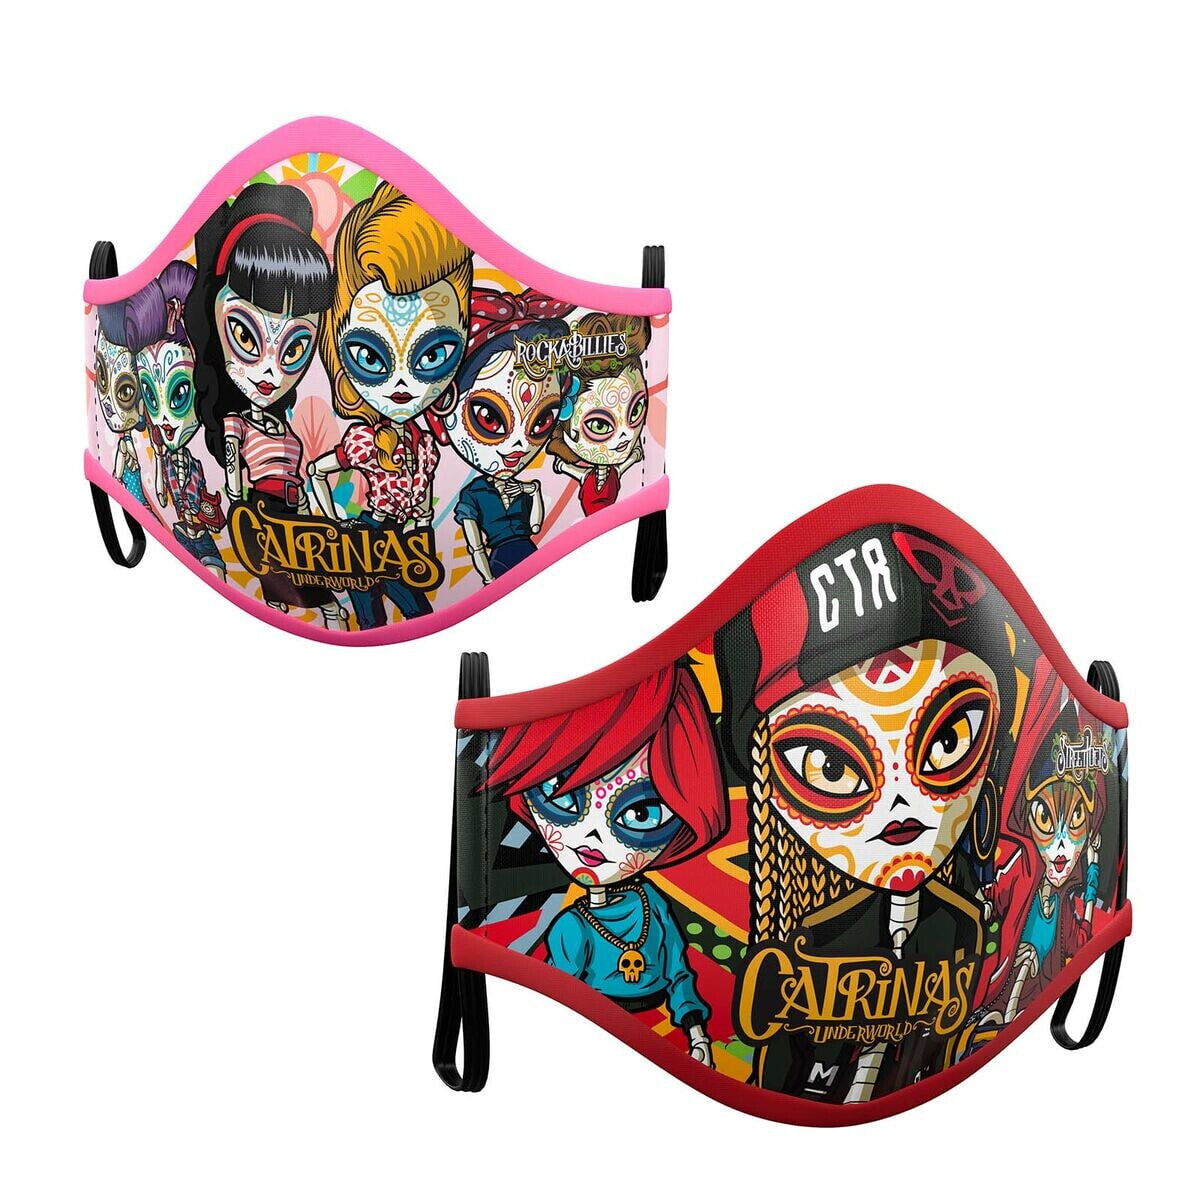 Reusable Fabric Mask My Other Me 10-12 Years Catrina